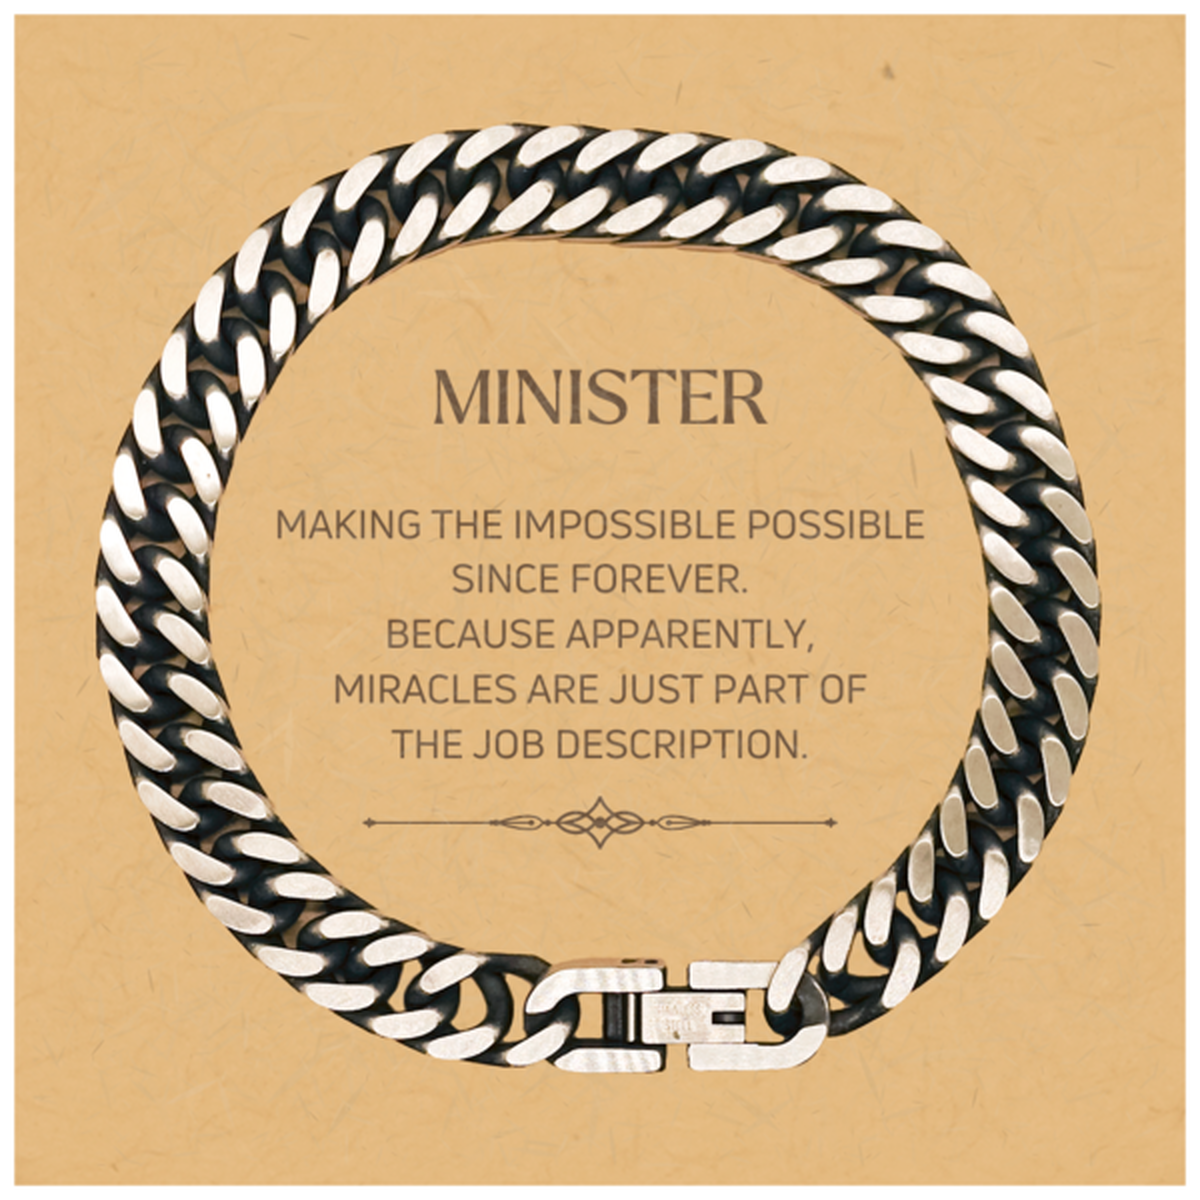 Funny Minister Gifts, Miracles are just part of the job description, Inspirational Birthday Christmas Cuban Link Chain Bracelet For Minister, Men, Women, Coworkers, Friends, Boss